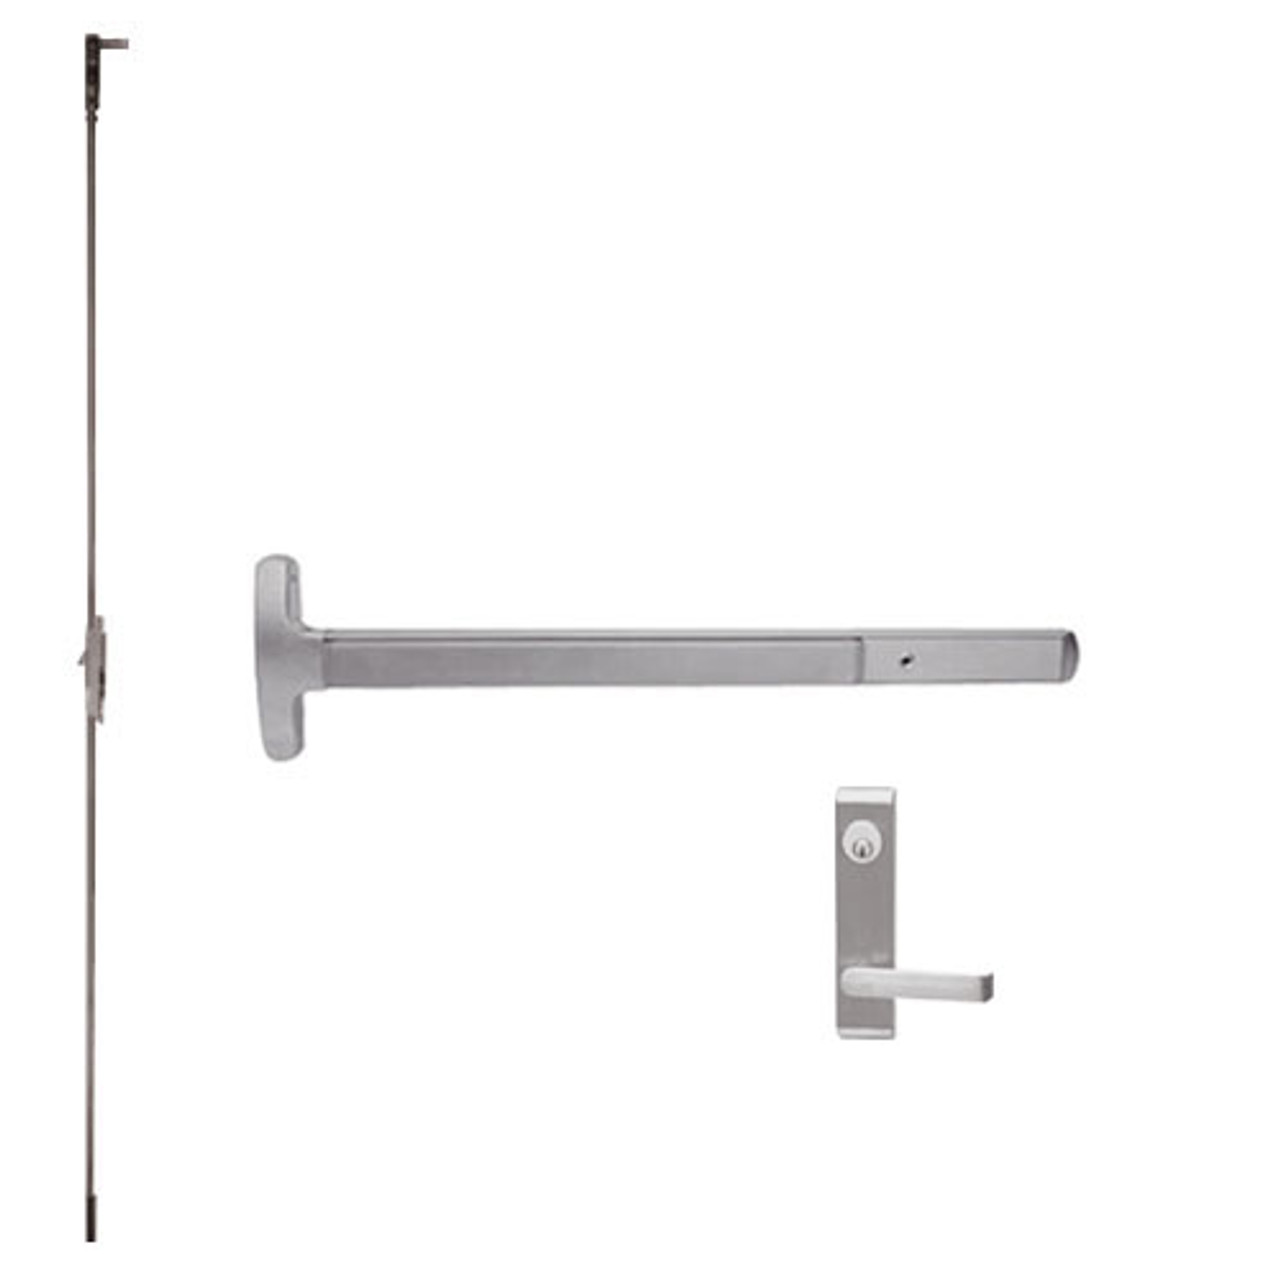 24-C-L-DANE-US32D-4-RHR Falcon Exit Device in Satin Stainless Steel